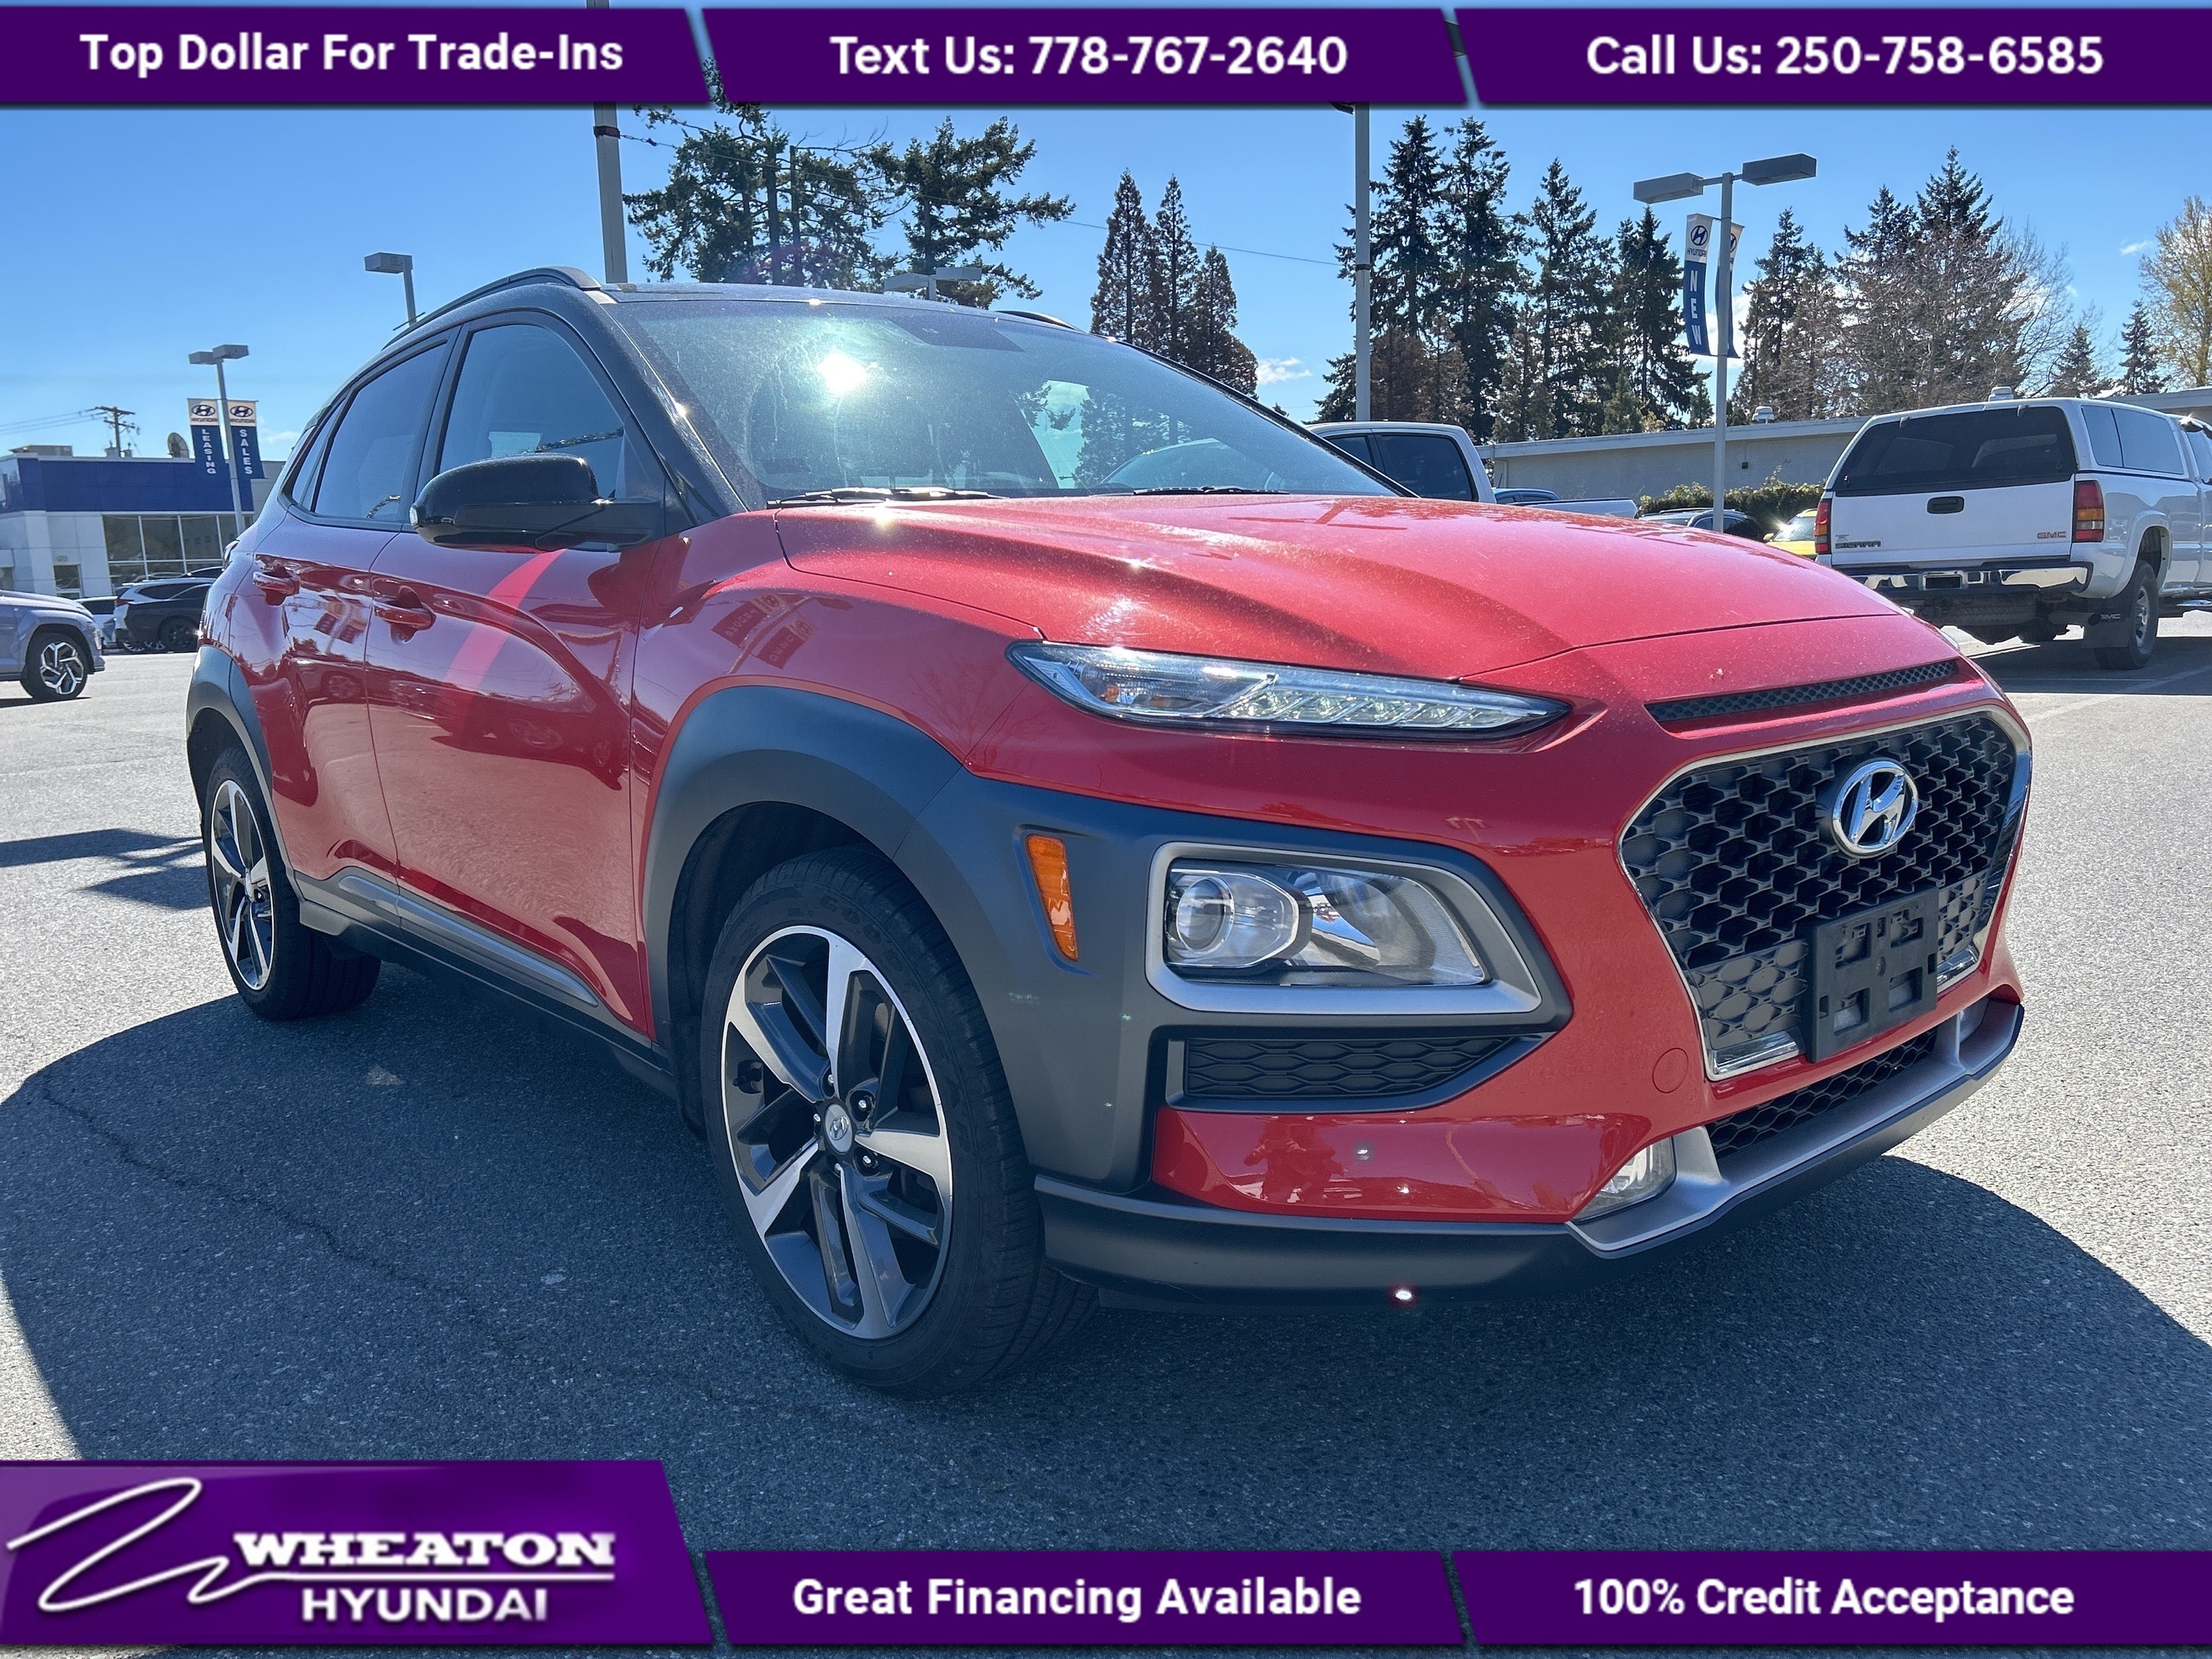 2018 Hyundai Kona Trend, One Owner, Local, Trade in, Heated Seats, H